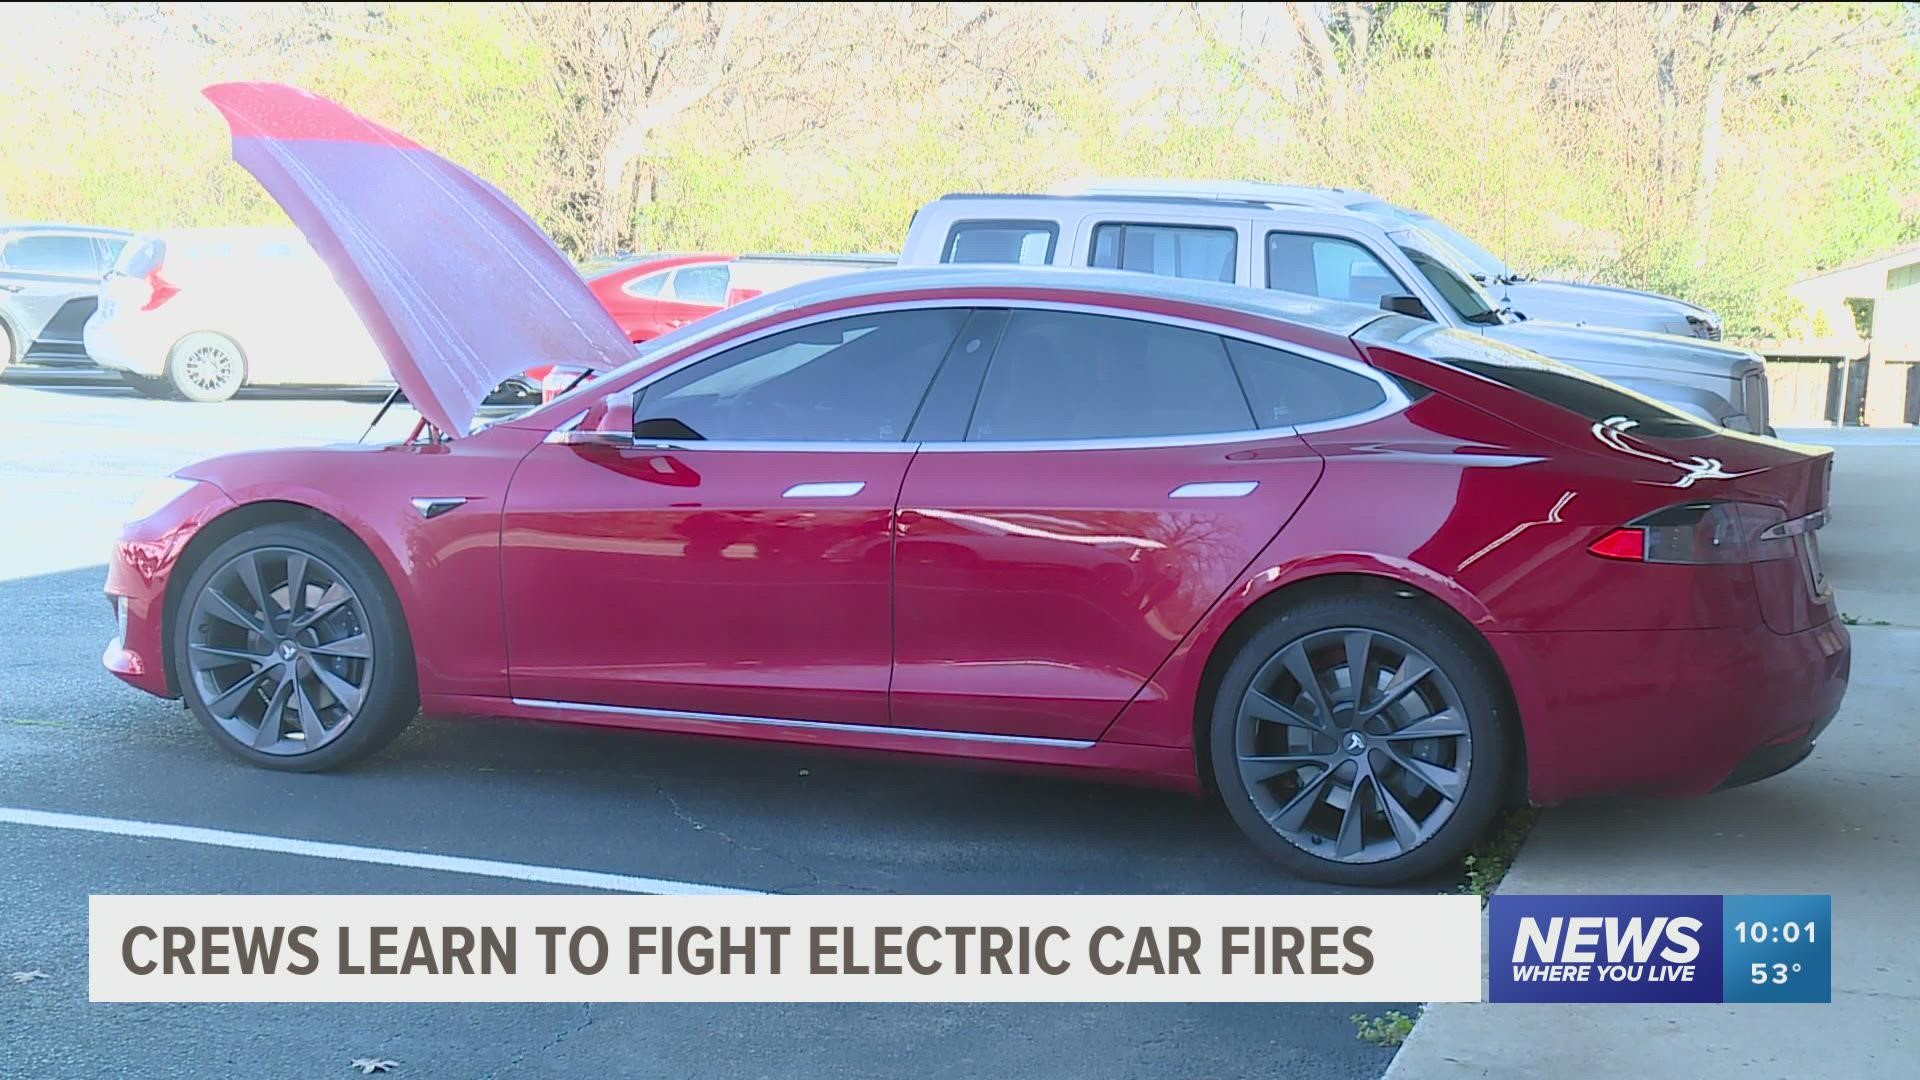 Firefighters across Arkansas are starting to receive training on electric cars fires and how to put them out.